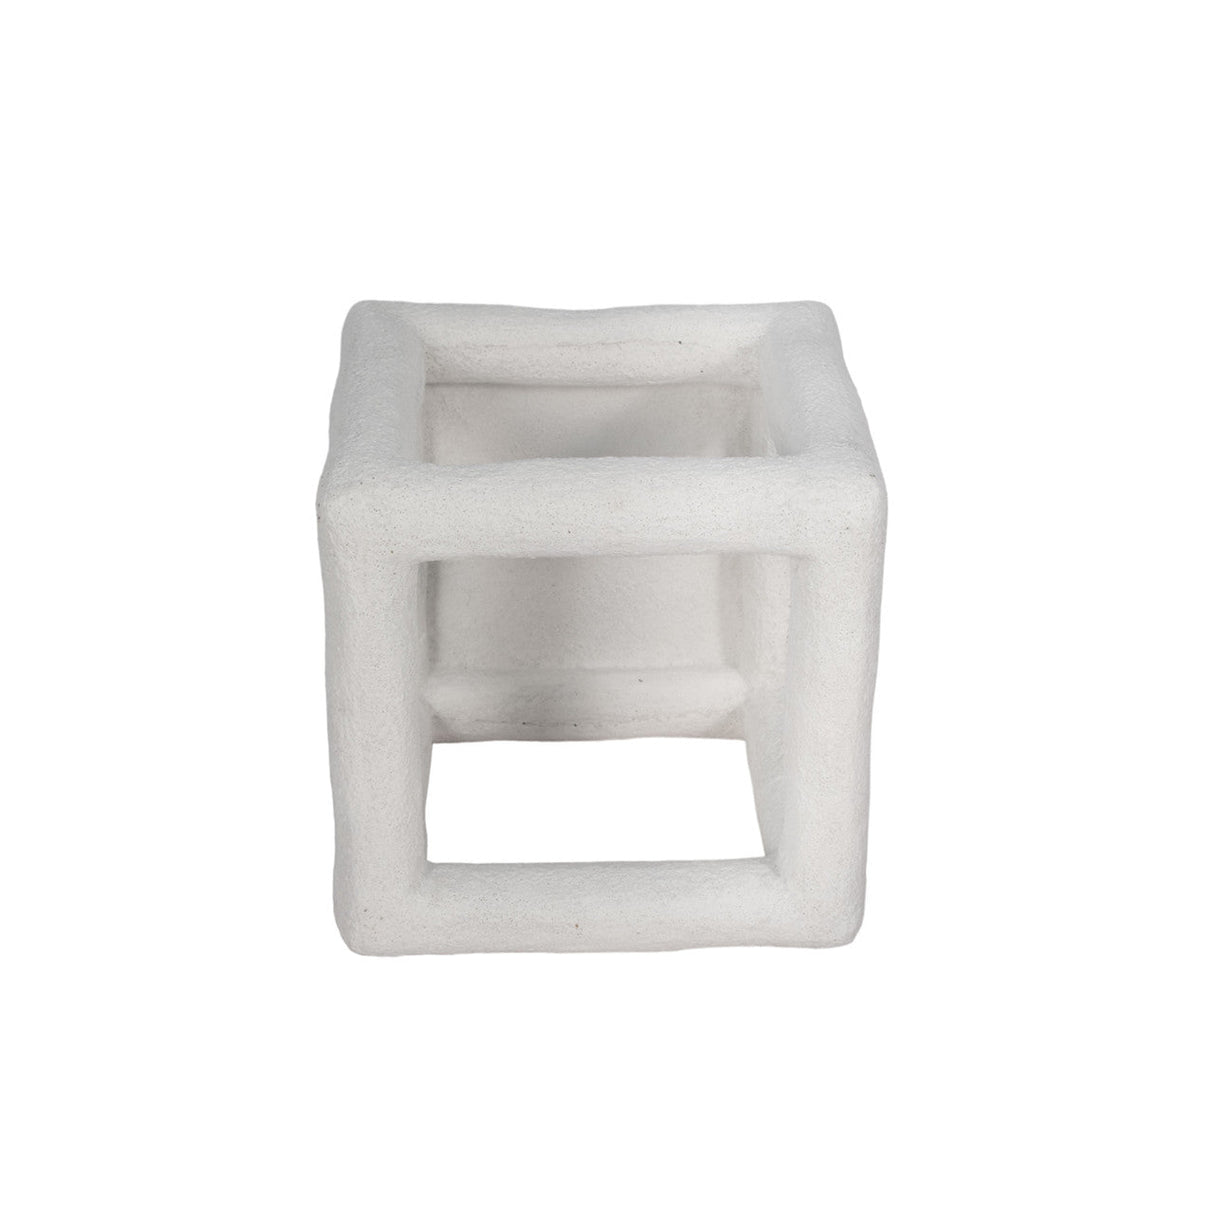 10" Textured Open Square Object, White